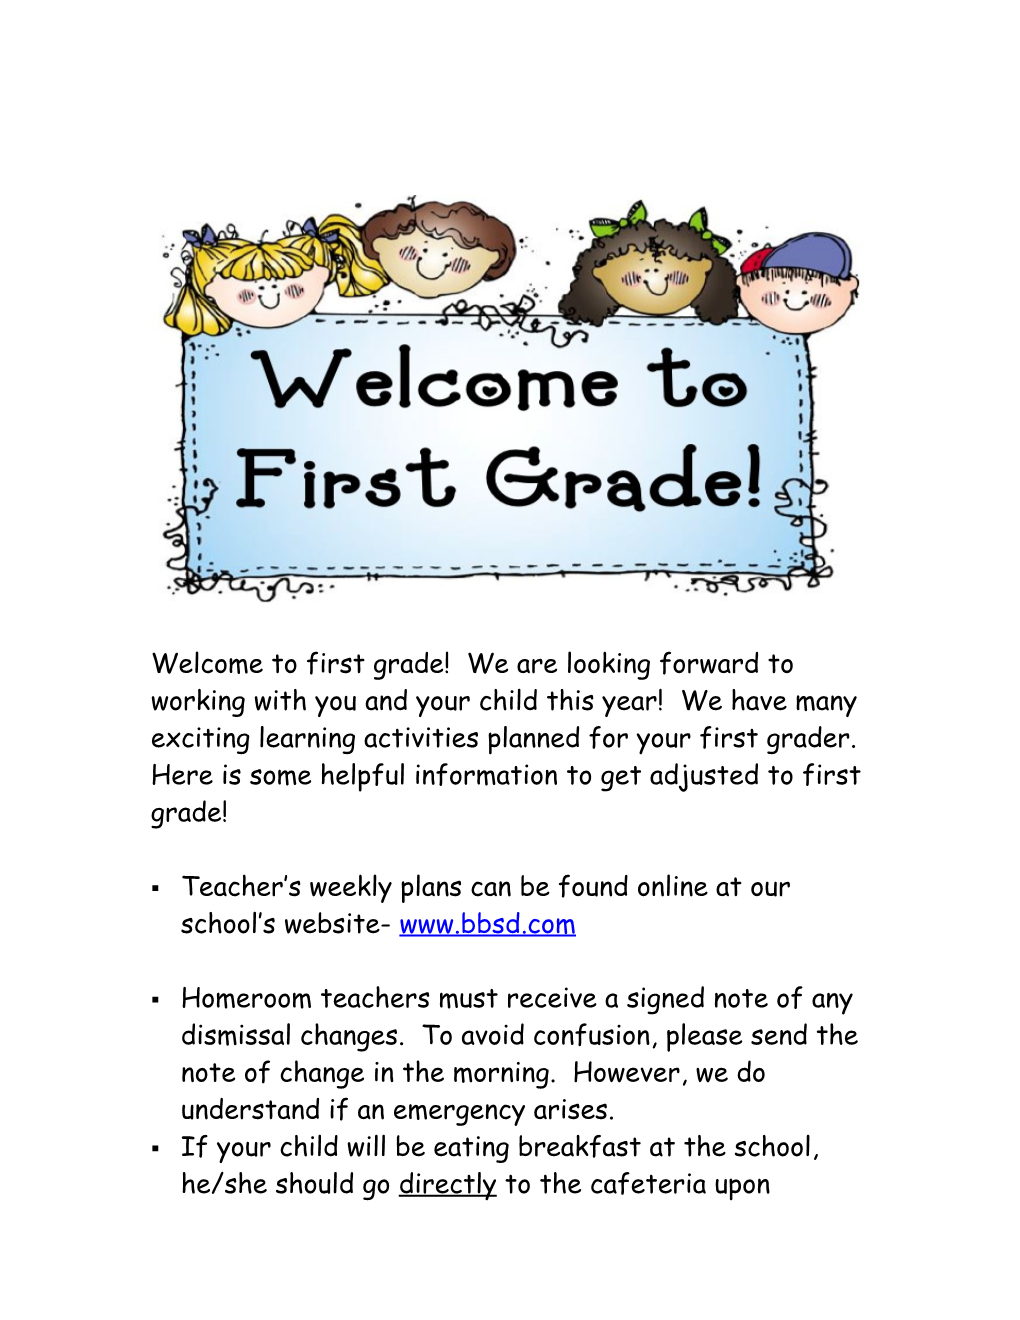 Welcome to First Grade! We Are Looking Forward to Working with You and Your Child This